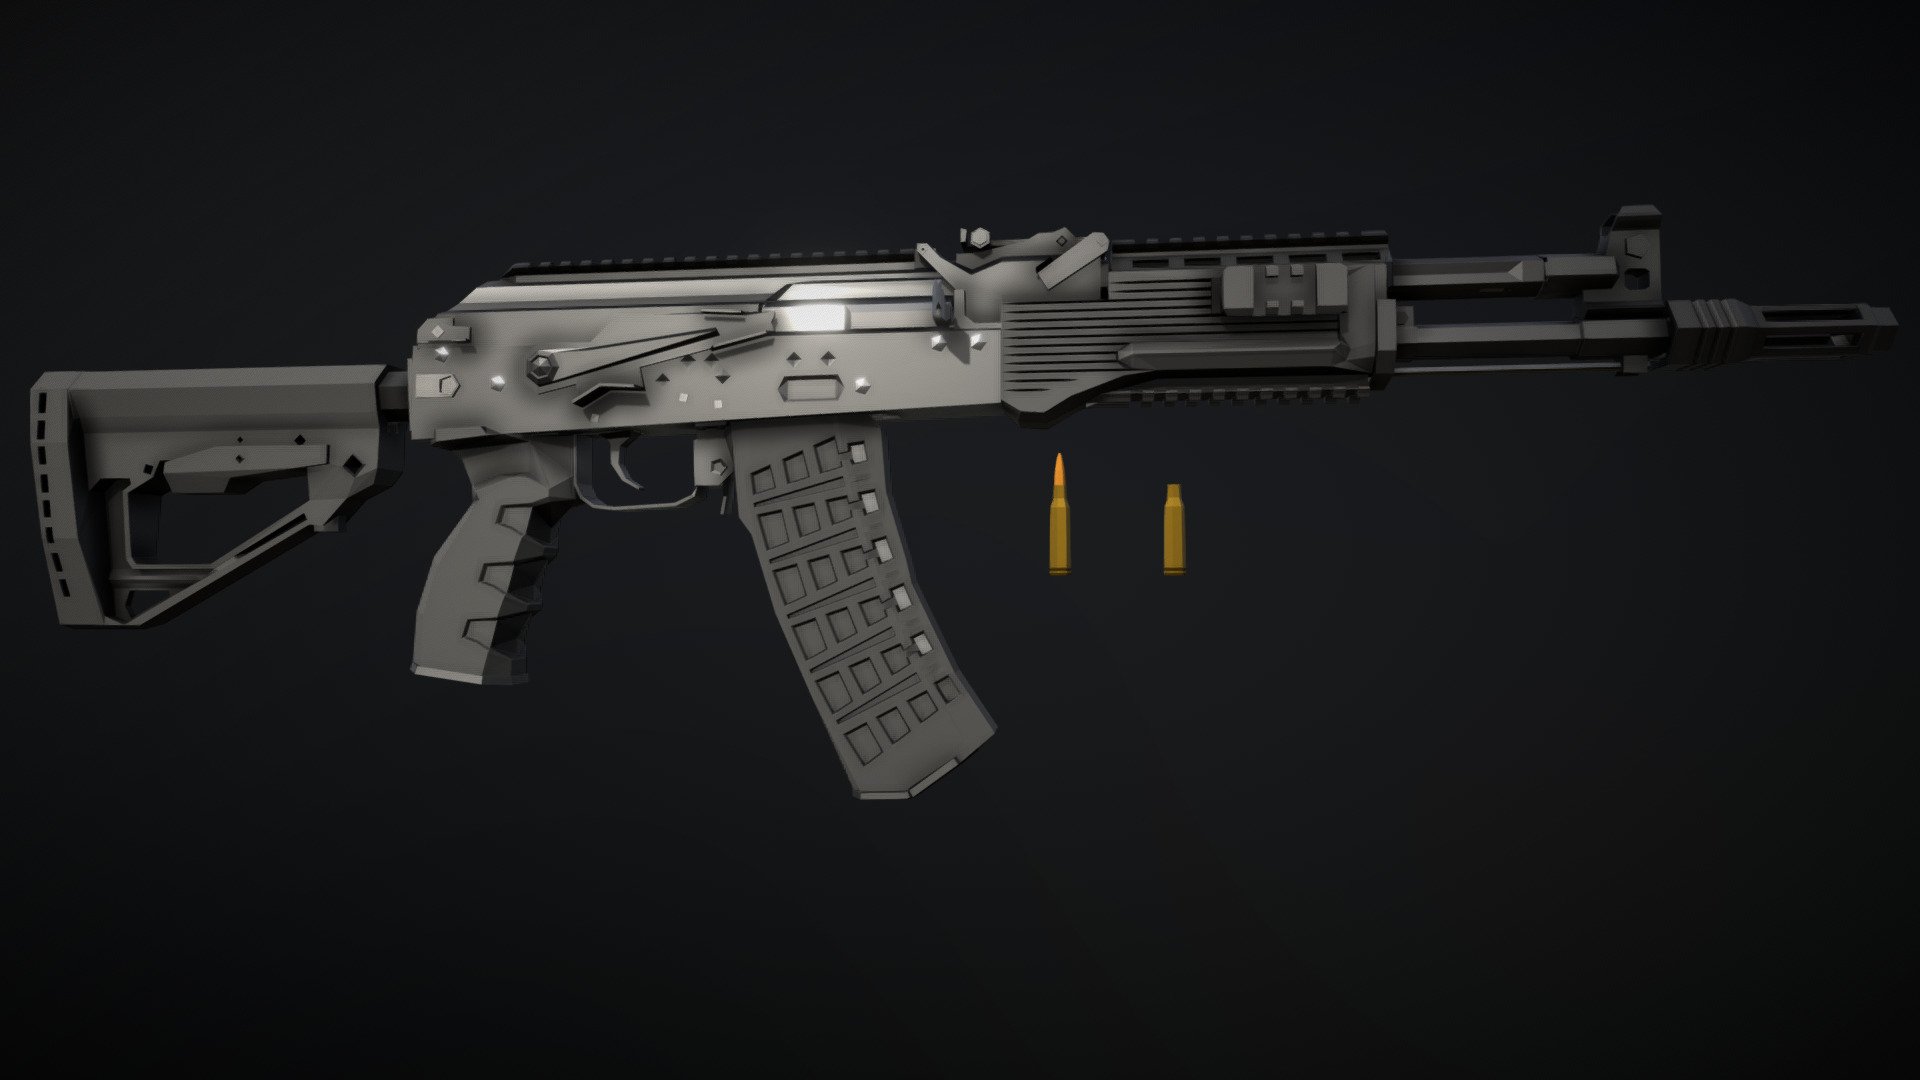 Low-Poly model of the AK-205, modernization of the AK-105, and carbine variant of the AK-200 3d model